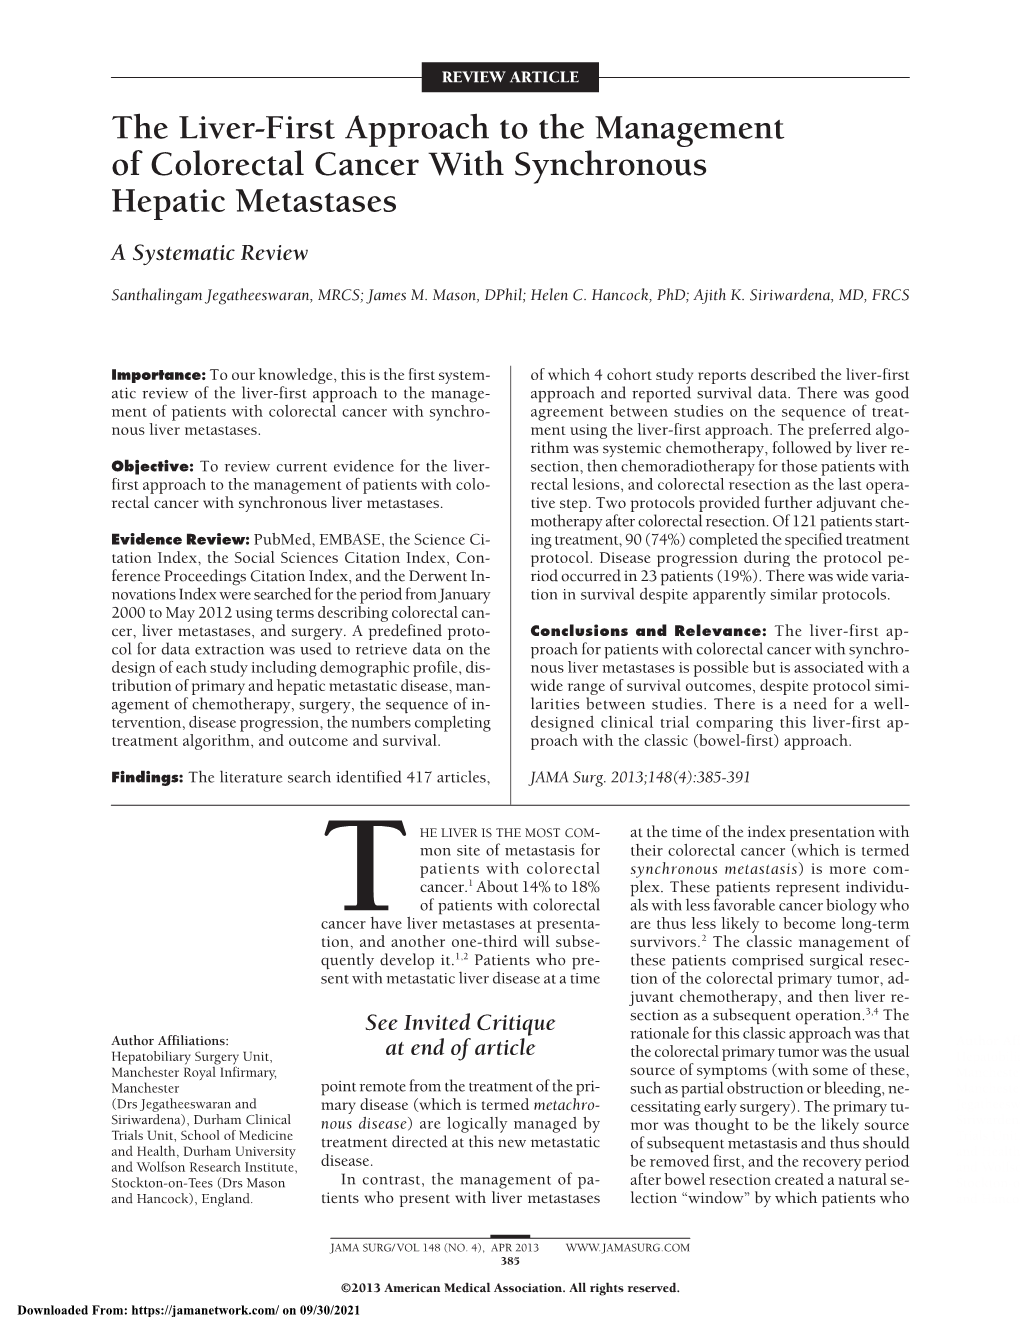 The Liver-First Approach to the Management of Colorectal Cancer with Synchronous Hepatic Metastases a Systematic Review